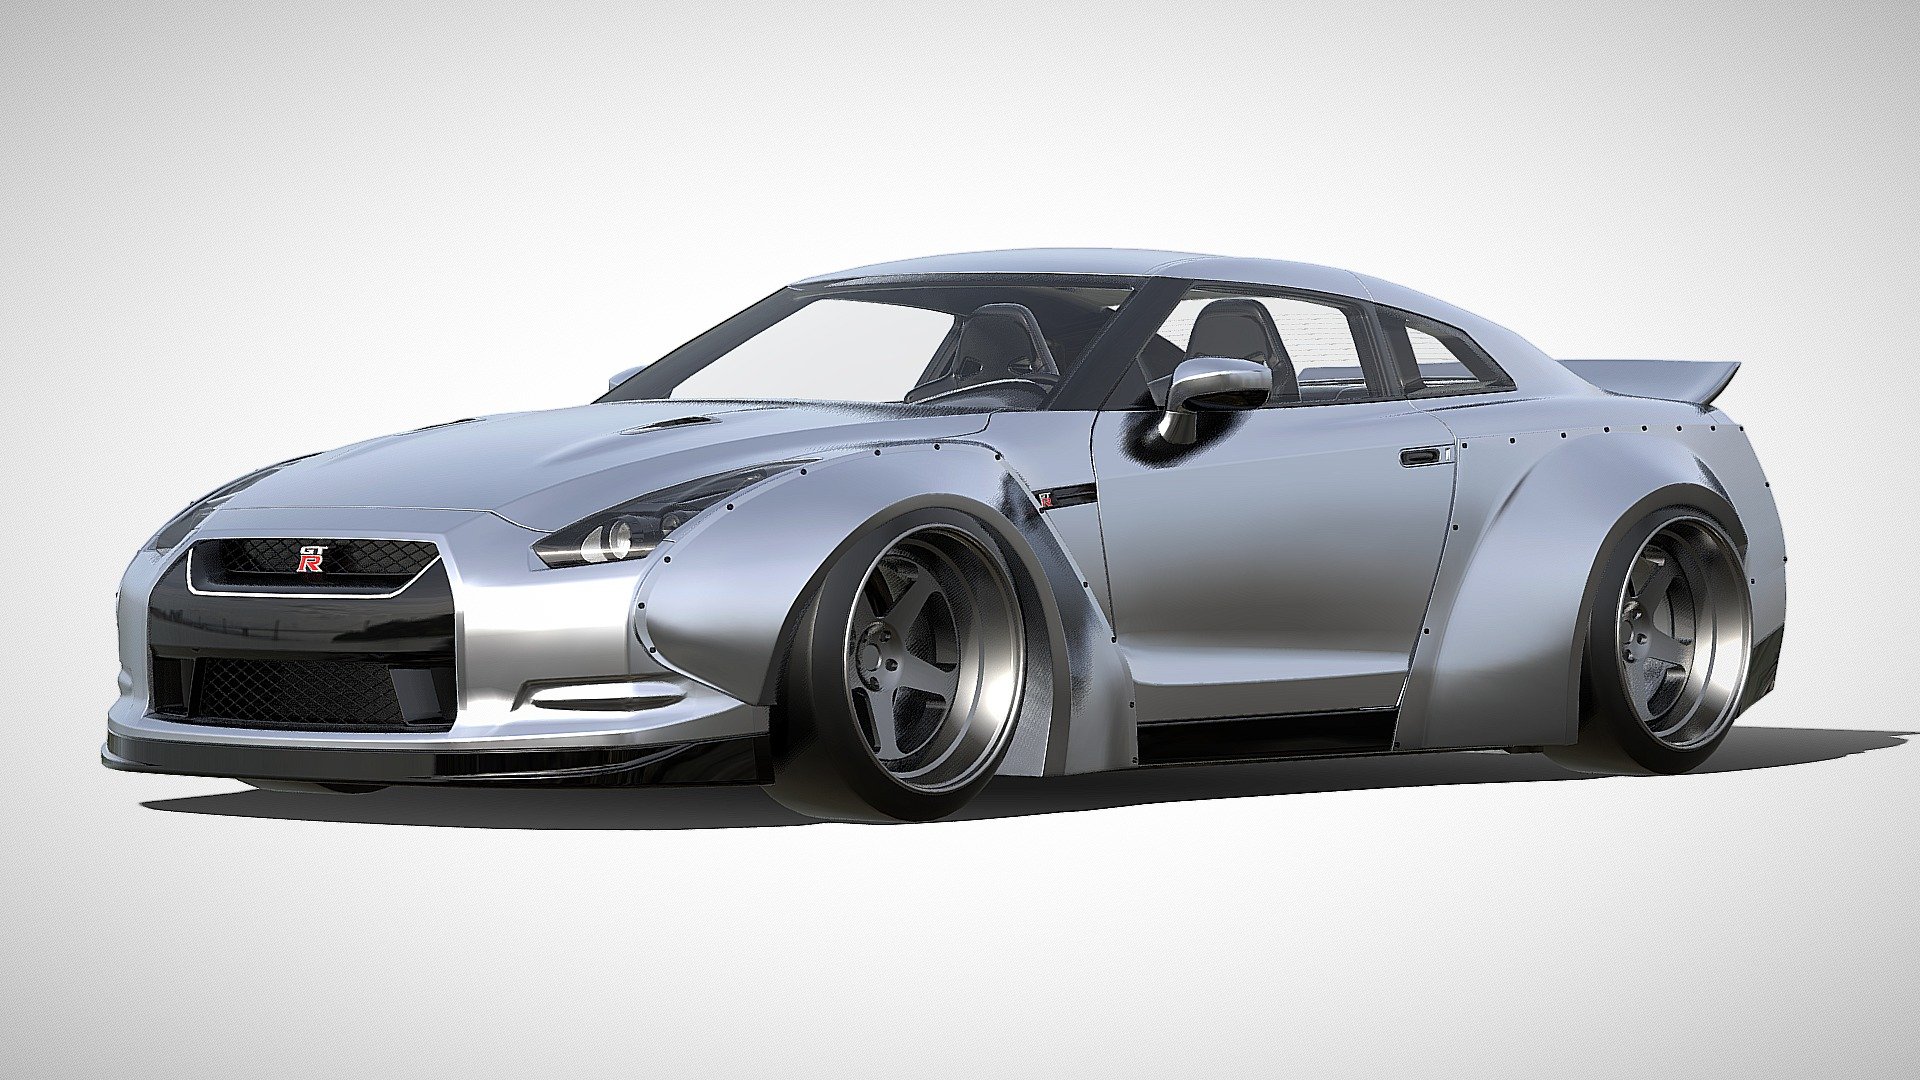 A highly detailed 3D model of the Nissan GT-R R35 created by HDM Studios team

Textures:
- All textures were included in this file, but you can also use the glb file - it is in this type of file that textures are attached to the model.

About 3D model:




Highly detailed car model.

Animated model (Blend.file)

PBR textures (Key Shot)

Highly detailed interior of the car

Suitable for use in games

Thank you for purchasing our models! - Nissan GT-R - Buy Royalty Free 3D model by HDM Studio (@HDM.Studio) 3d model